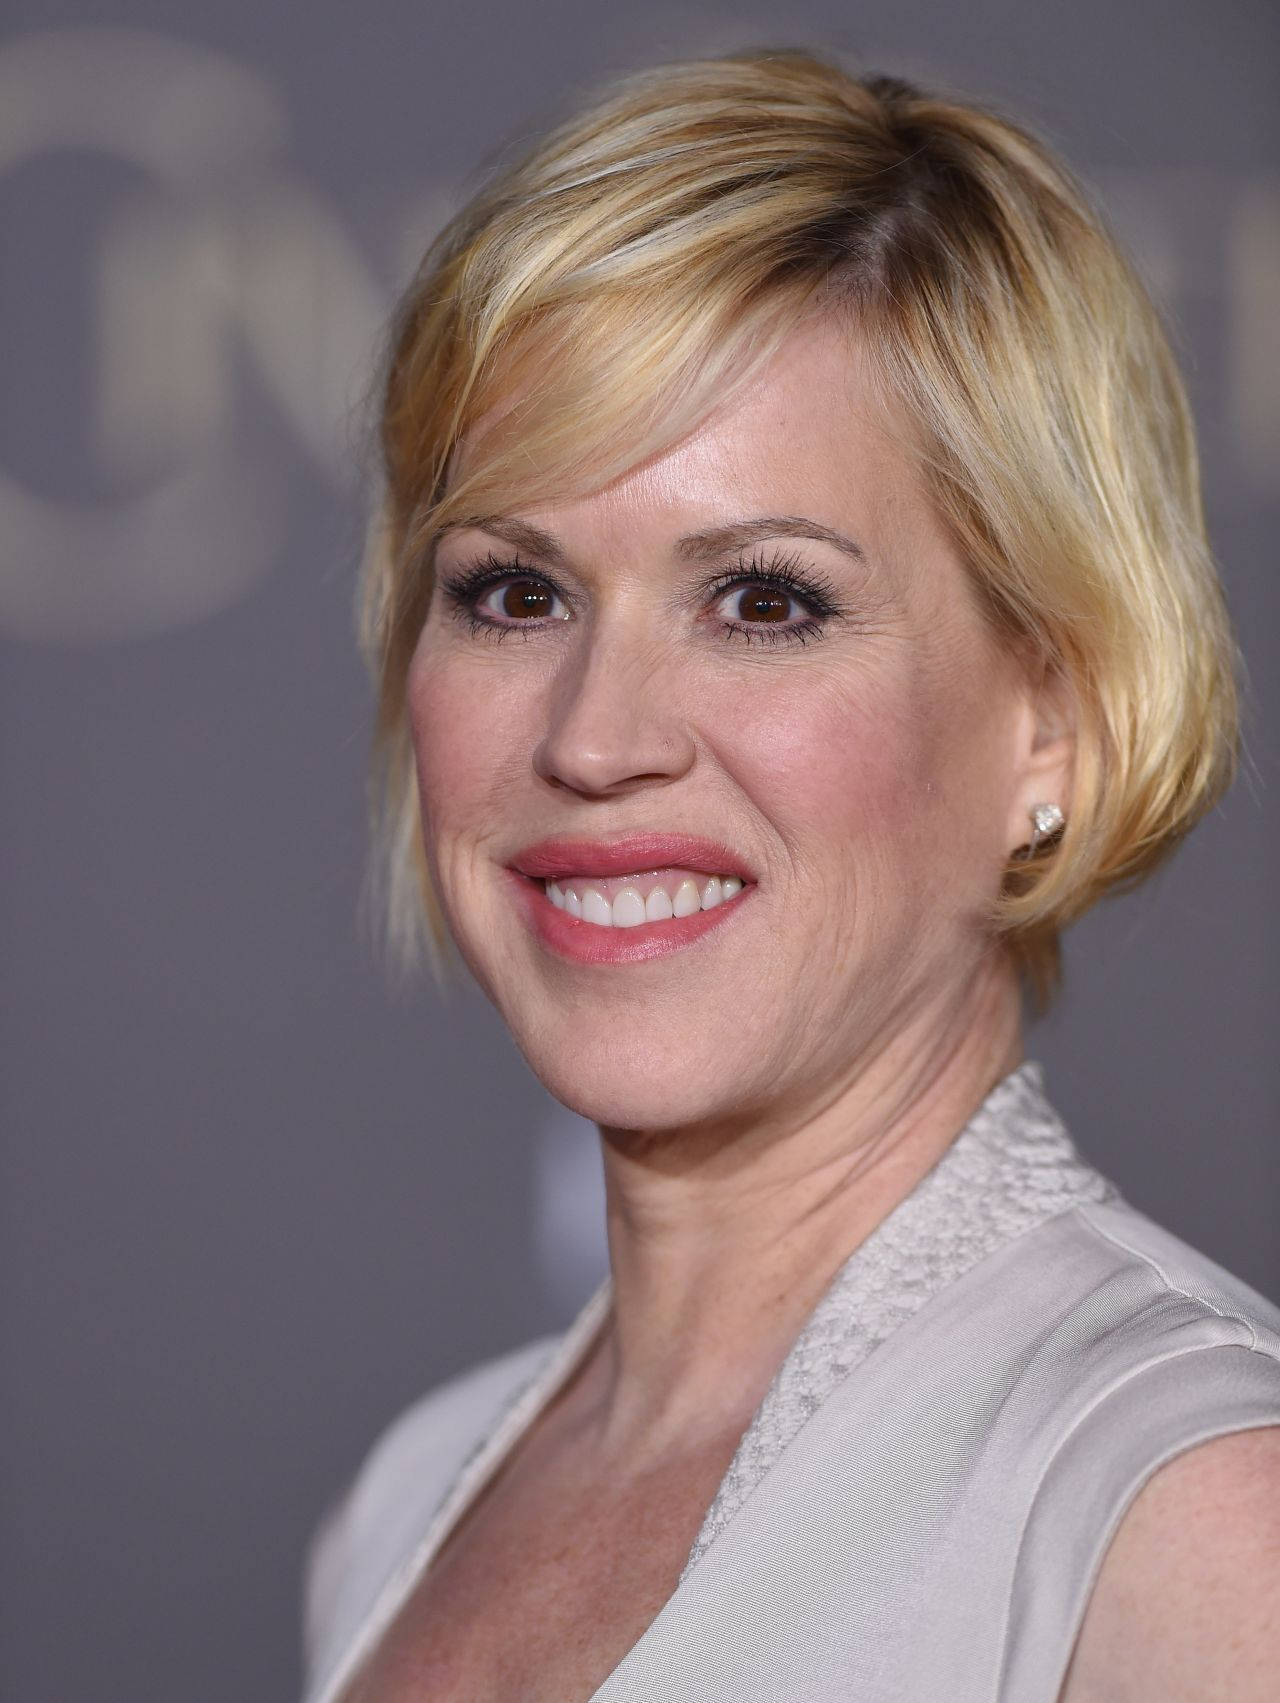 Actress Molly Ringwald with Blonde Pixie Hairstyle Wallpaper